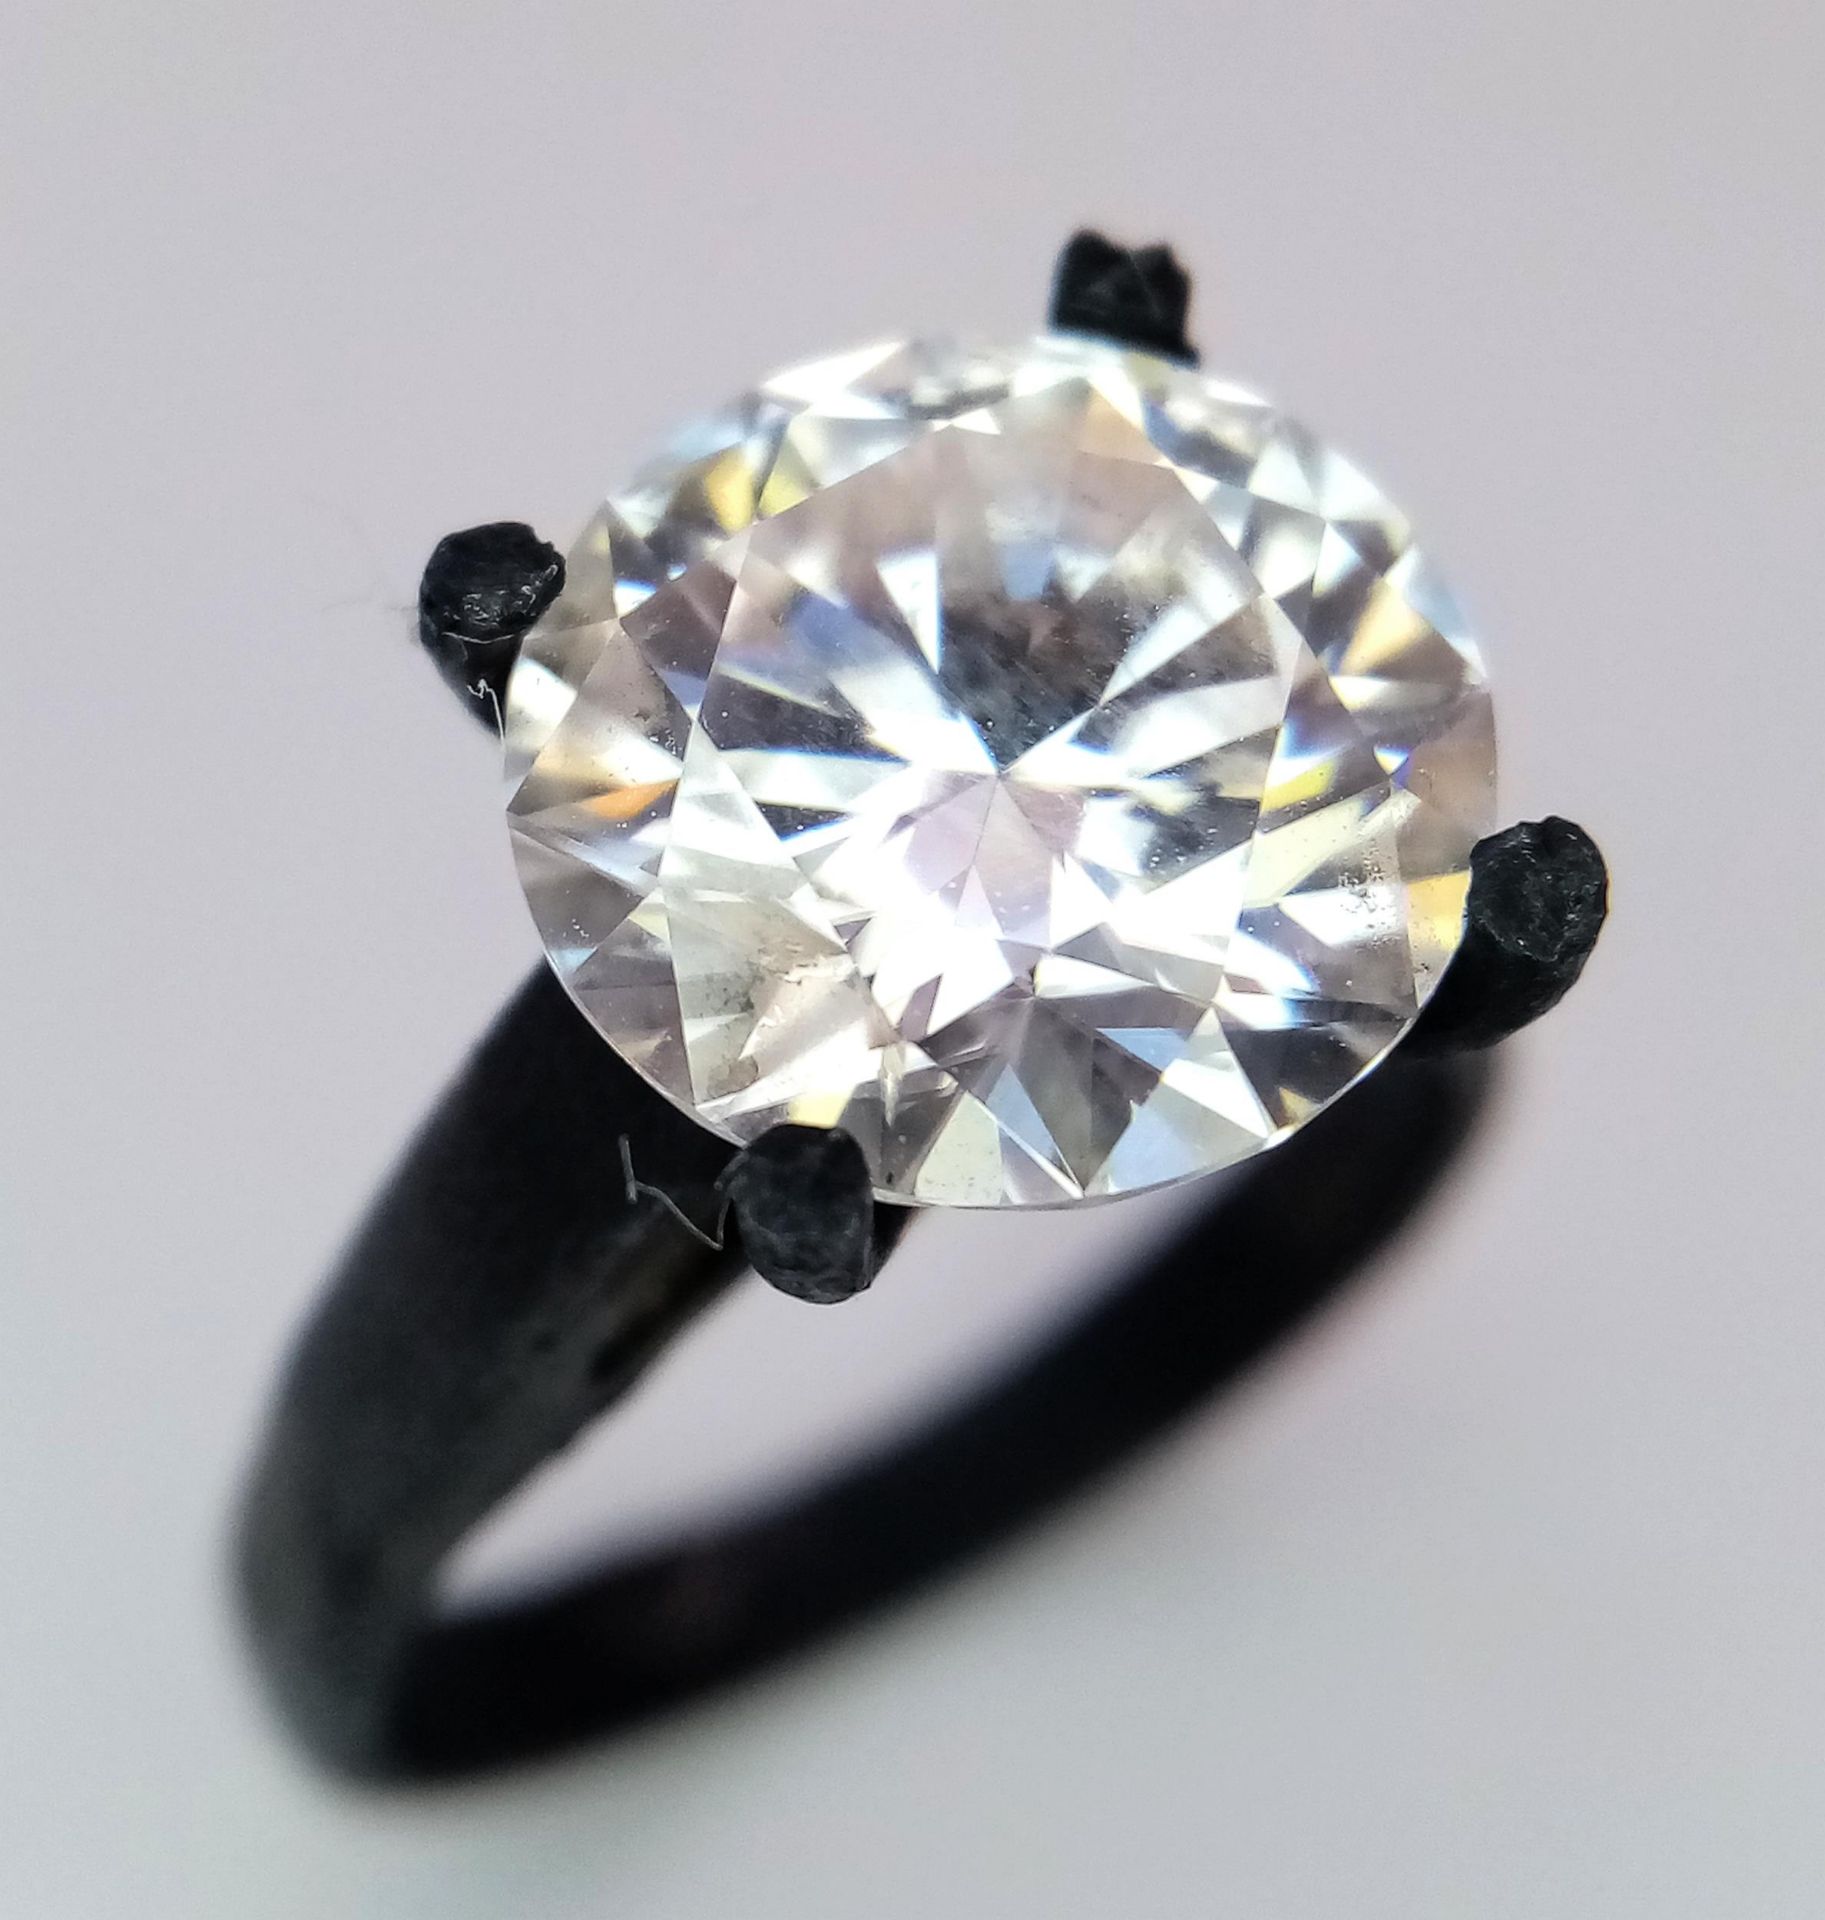 A 4ct Moissanite Solitaire Ring. Set in a matt black finish metal. Comes with a GRA certificate.